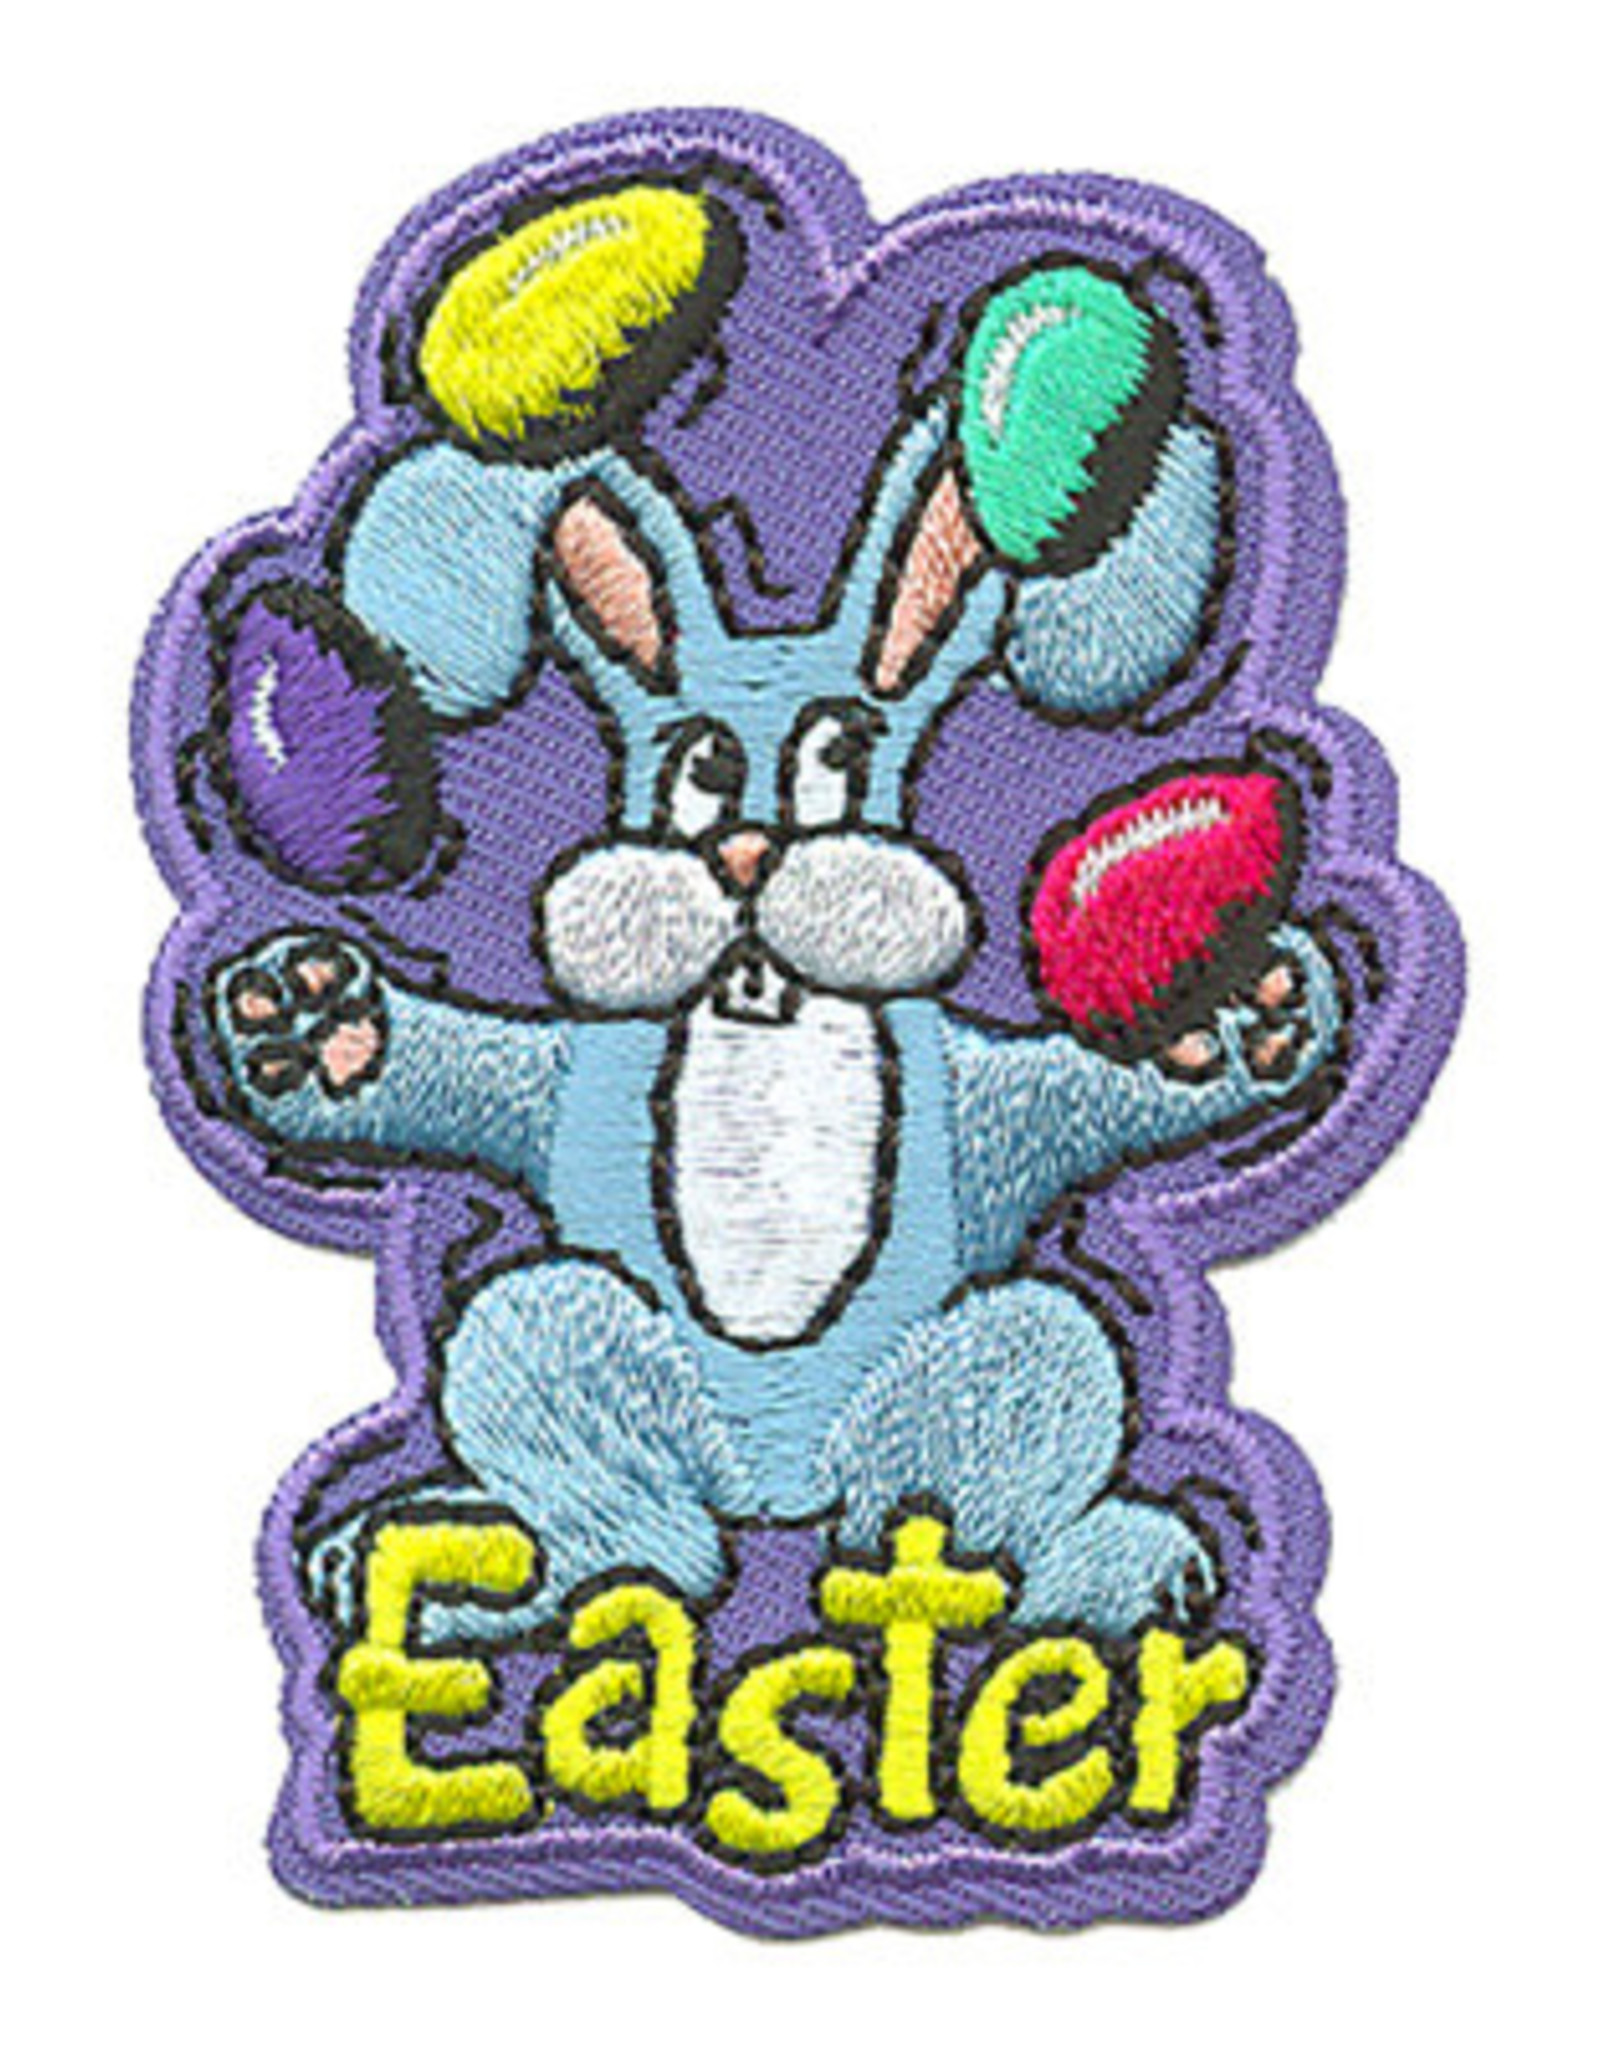 Easter Bunny Juggling Jellybeans Patch